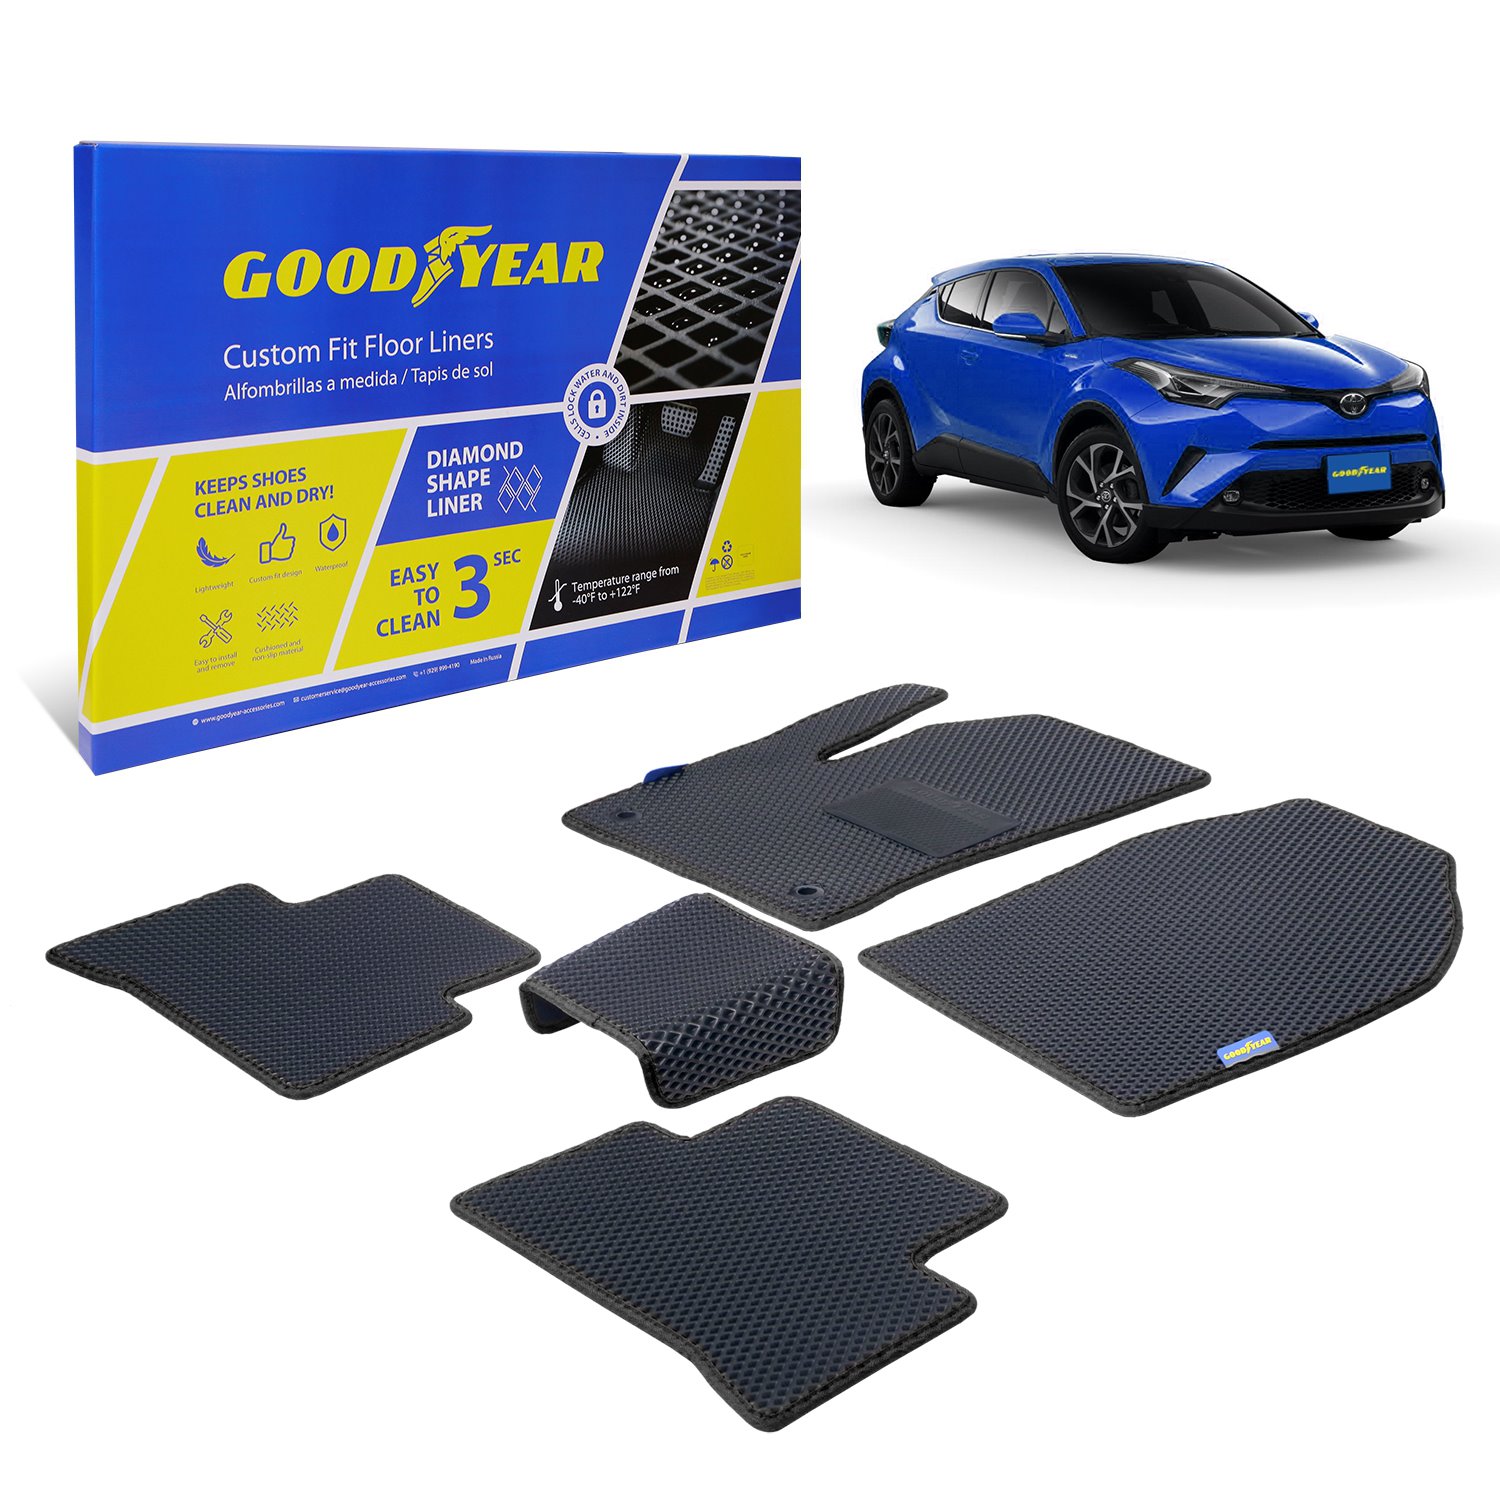 Goodyear Custom-Fit Floor Liners Fits Select Toyota C-HR